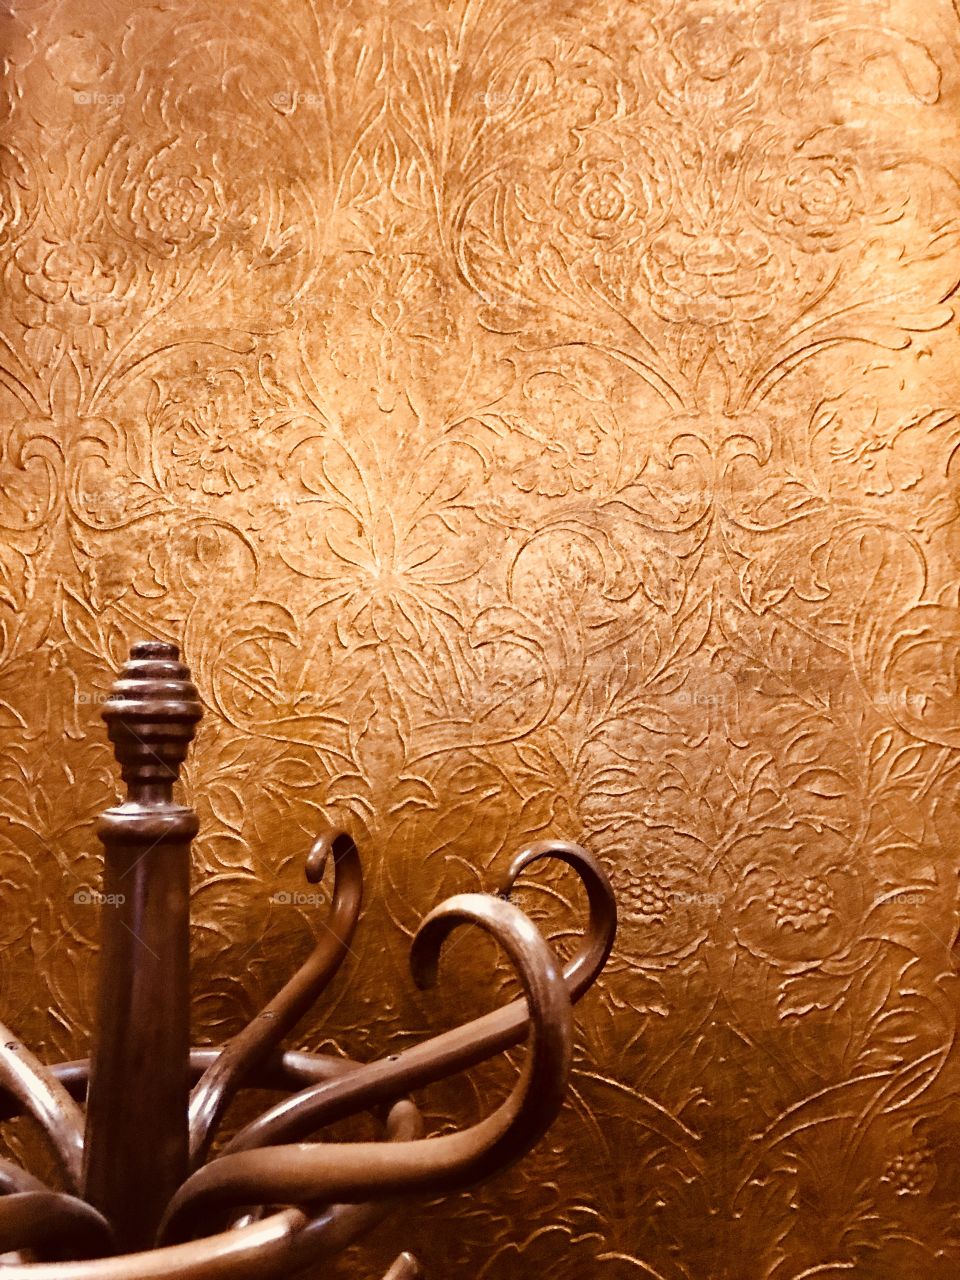 Hatstand against a golden patterned wall